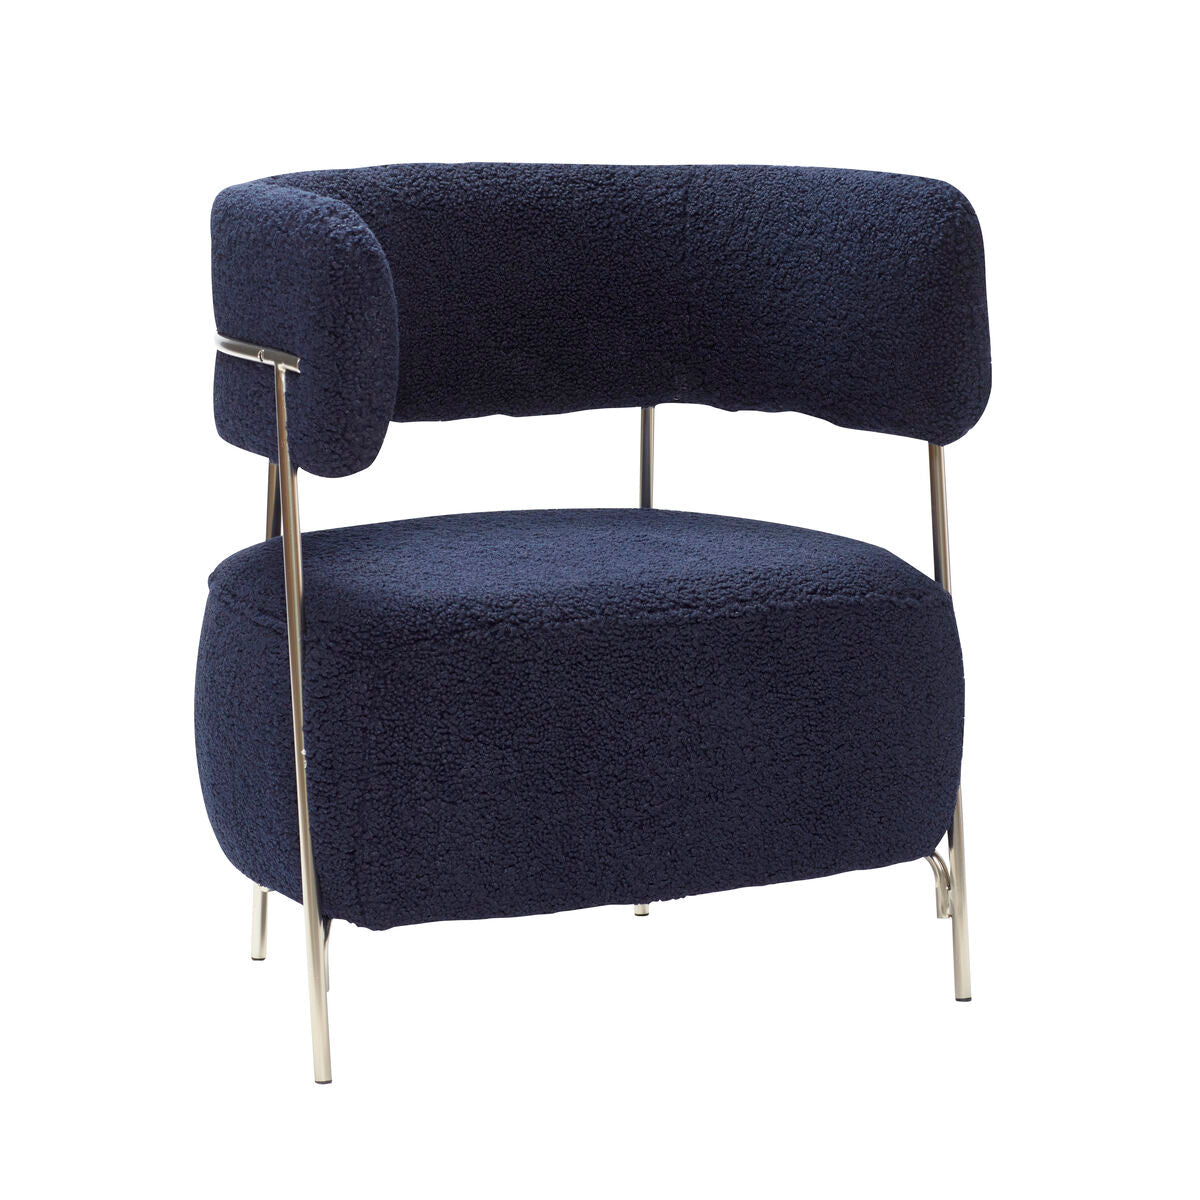 Then it is a unique armchair that catches your attention with a modern form. It was made of black metal structure. In order to get maximum comfort, the back and seat is filled with polyurethane foam. They were covered with polyester, which is pleasant to the touch. Dark blue material will add elegance to any room. In addition, it will introduce a note of severity, which will like especially with interiors with Scandinavian and minimalist decor.